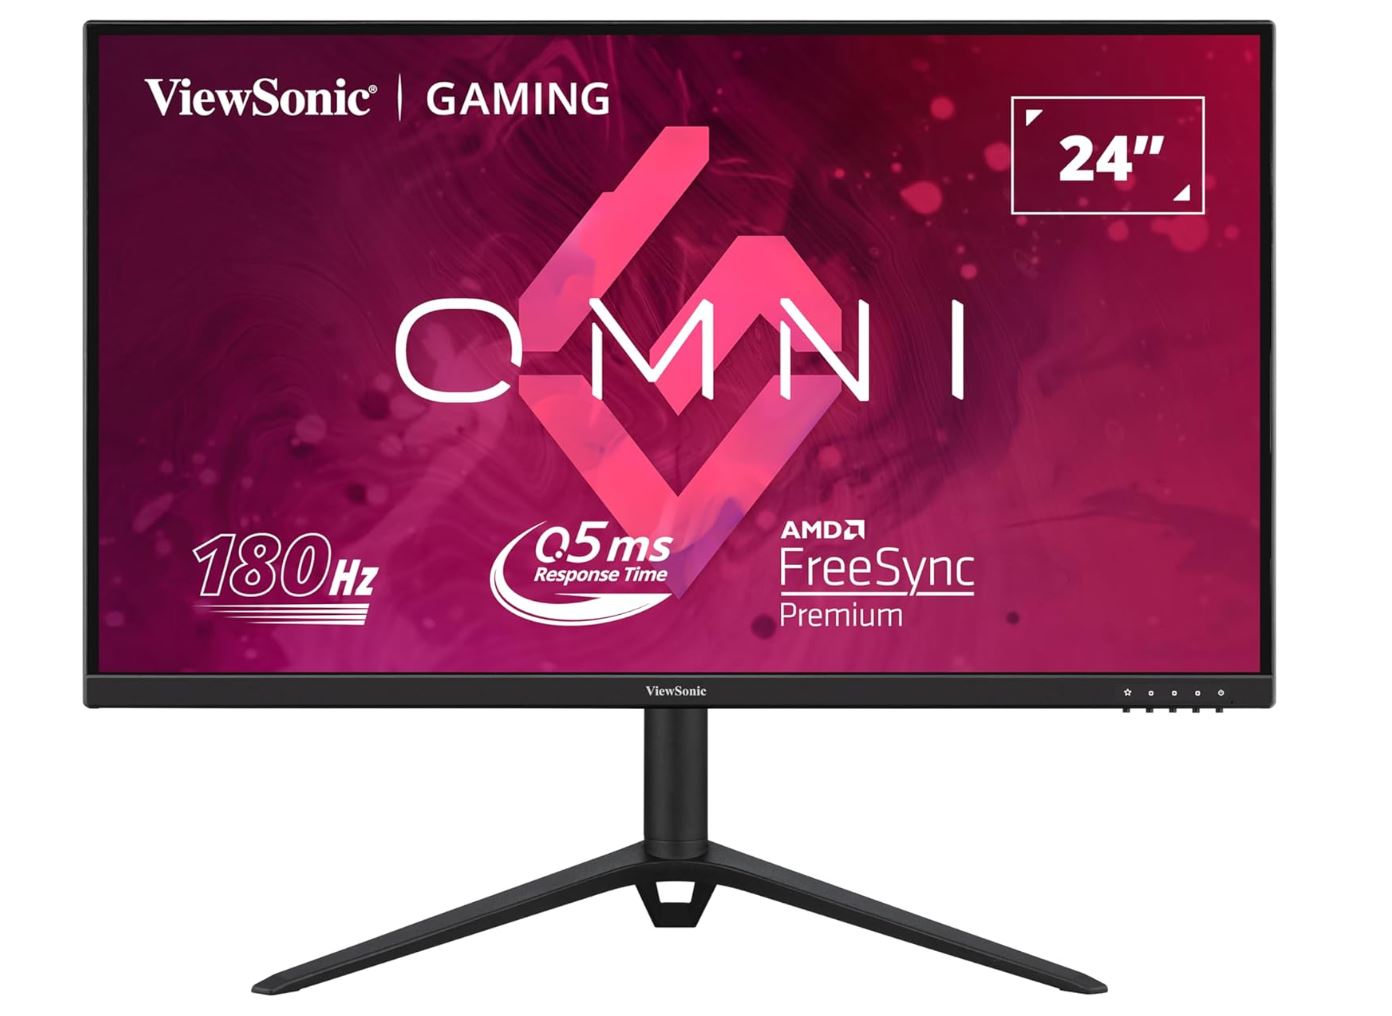 20 - 29 Inch LED/Viewsonic: ViewSonic, VX2428, 24, 180Hz, 0.5ms, Fast, IPS, Crisp, Image, and, Smooth, play., VESA, Clear, MR, certified, Freesync, Adaptive, Syn, 